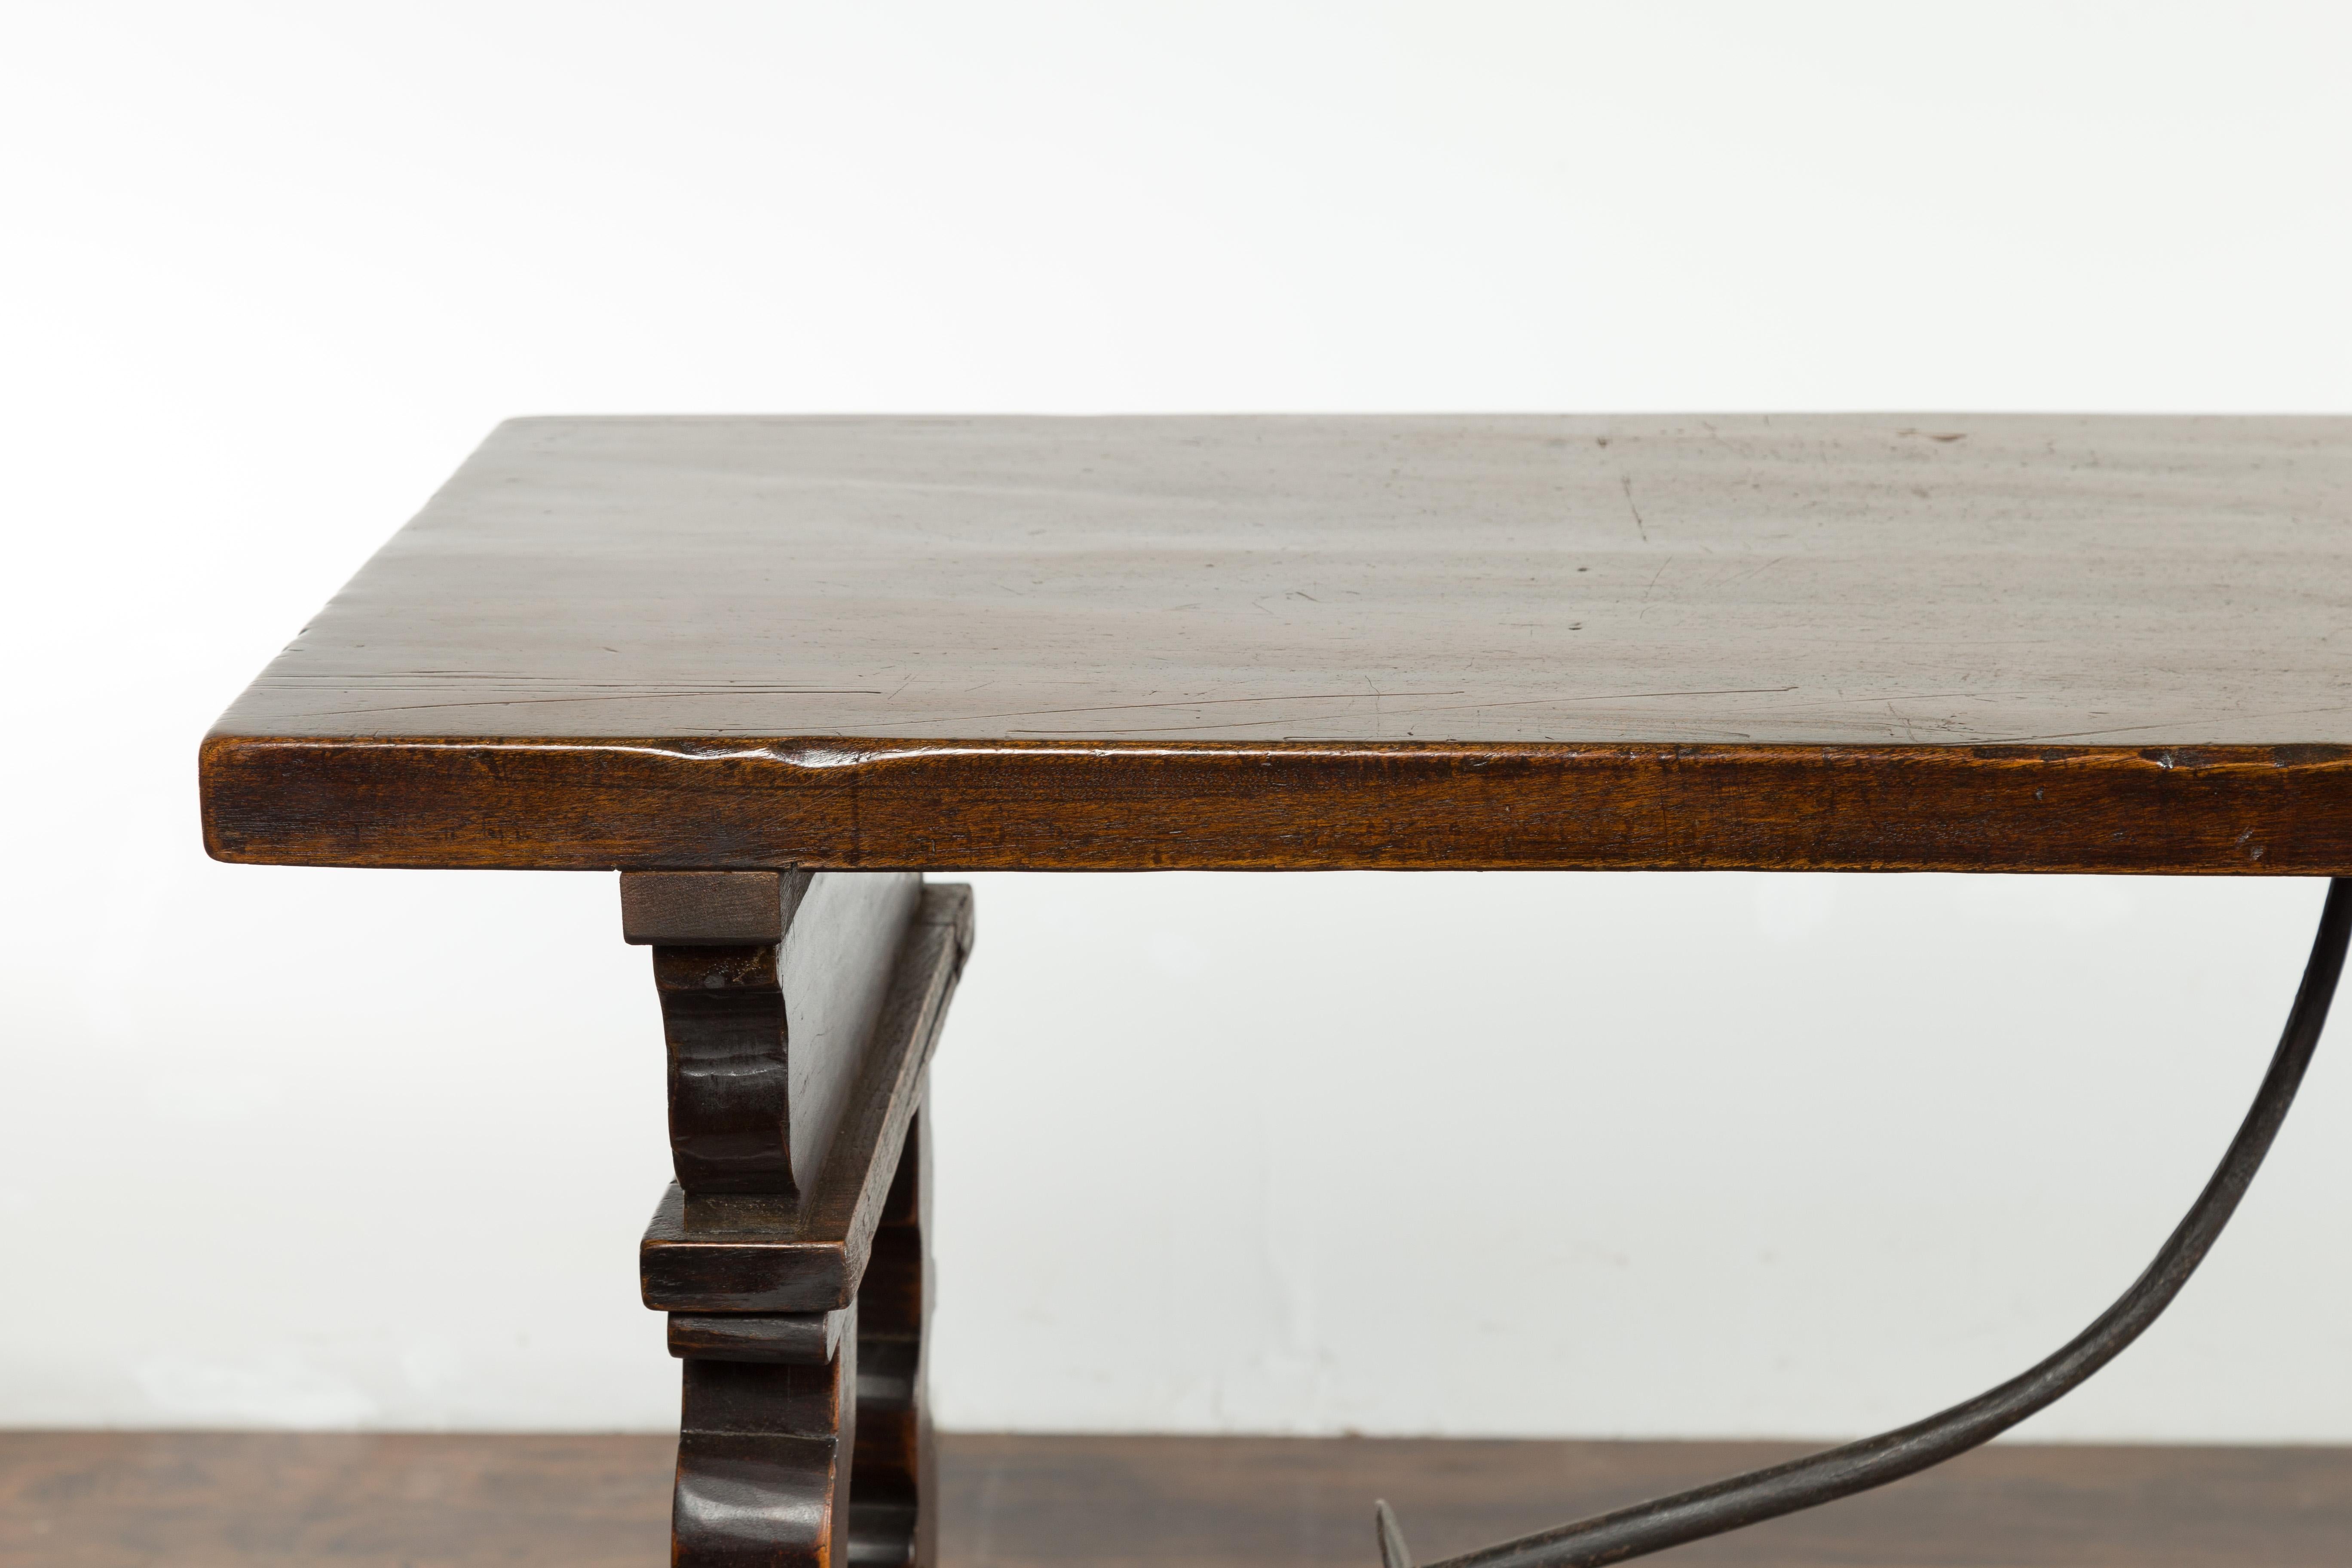 19th Century Italian 1820s Walnut Fratino Table with Iron Stretcher and Extension Leaves